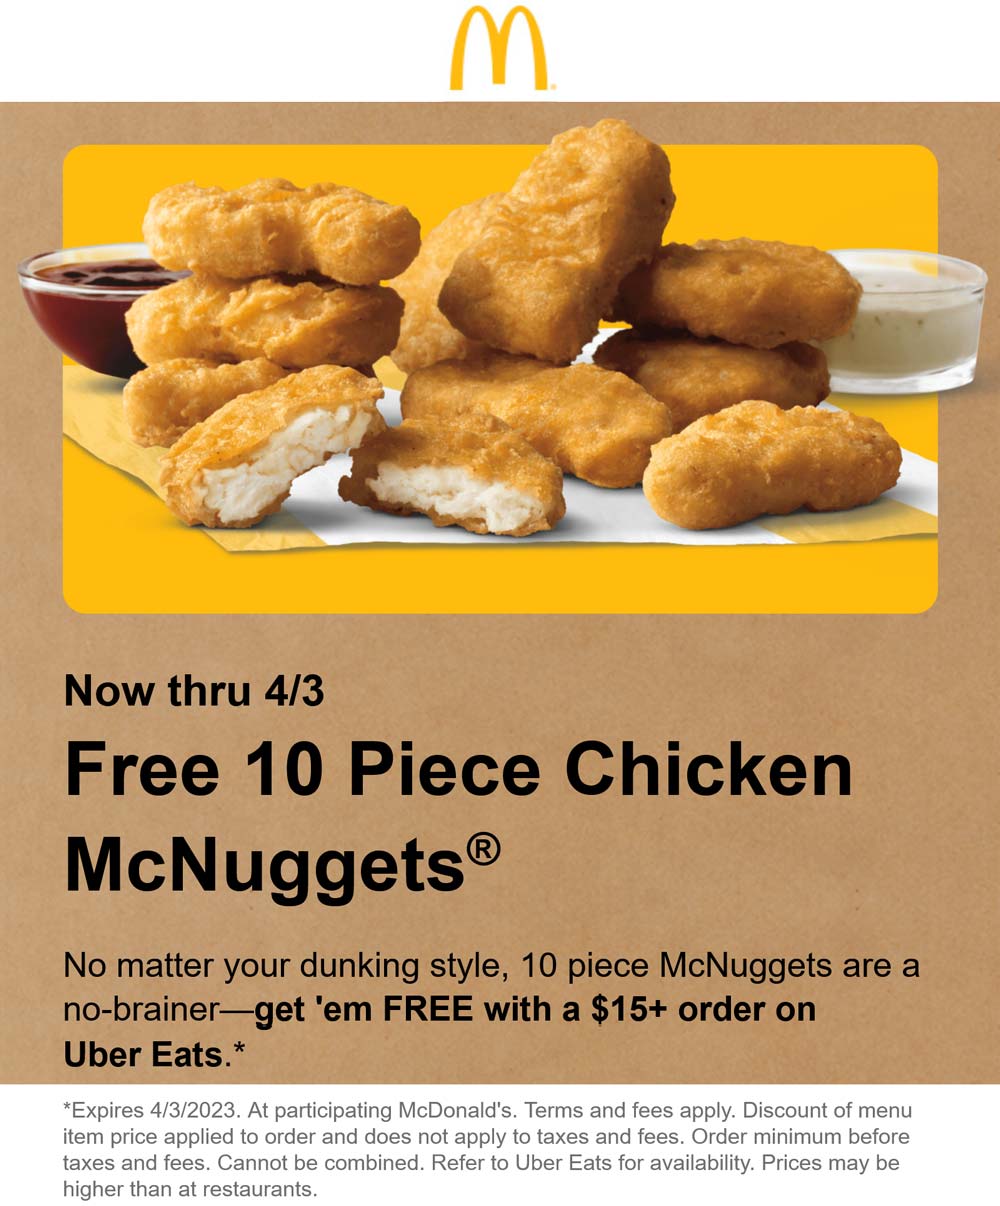 McDonalds restaurants Coupon  Free 10pc chicken mcnuggets on $15 delivery at McDonalds #mcdonalds 